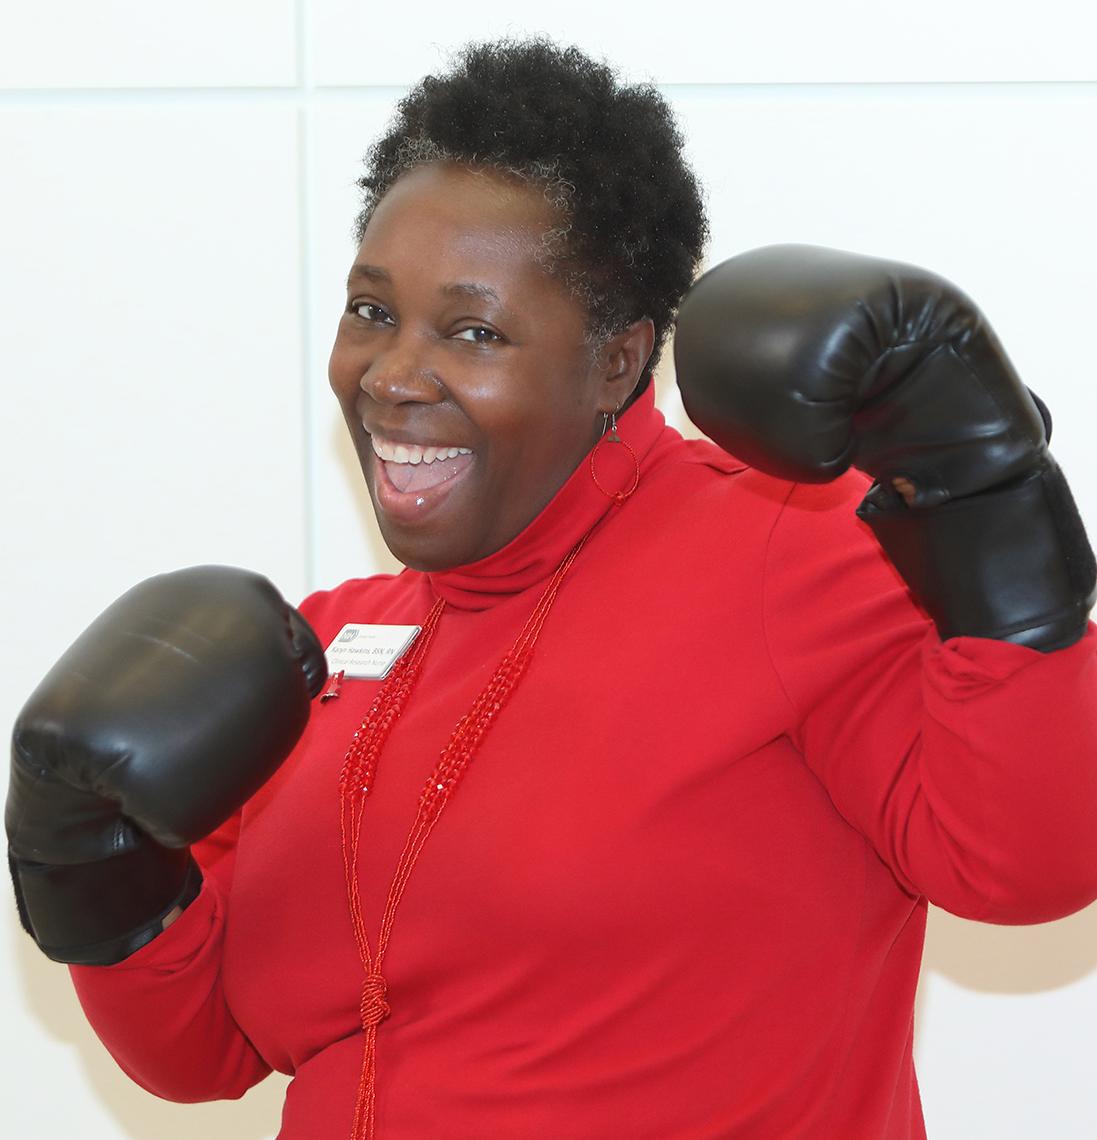 Clinical Center nurse poses in boxing gloves